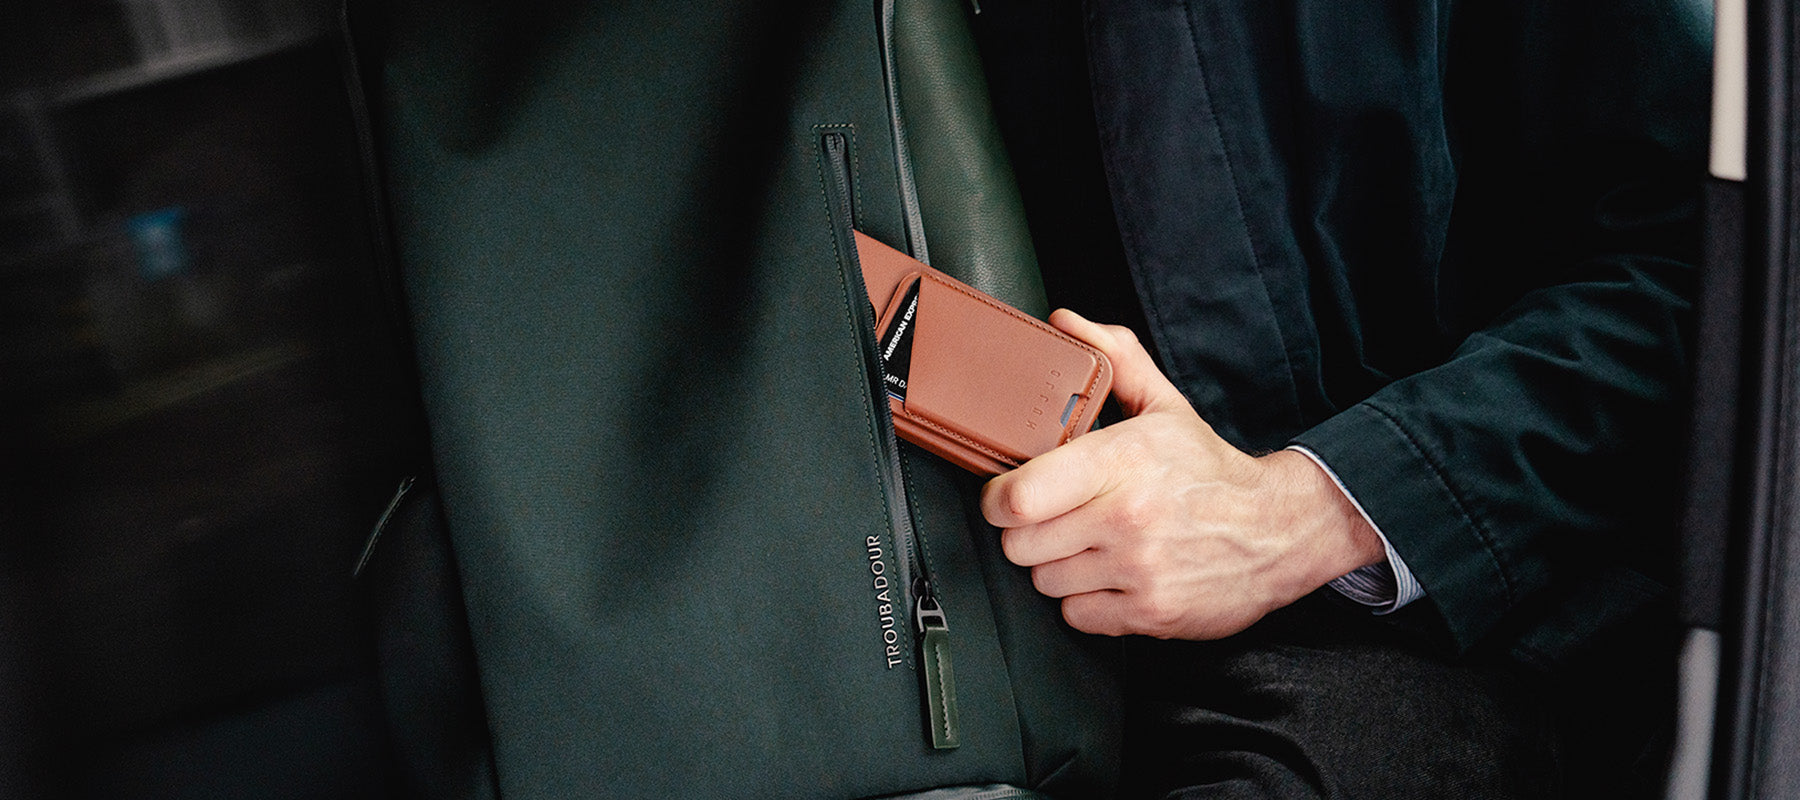  Premium Leather. Unmatched Protection. Explore our full leather cases -- the smarter way to carry your phone. 
